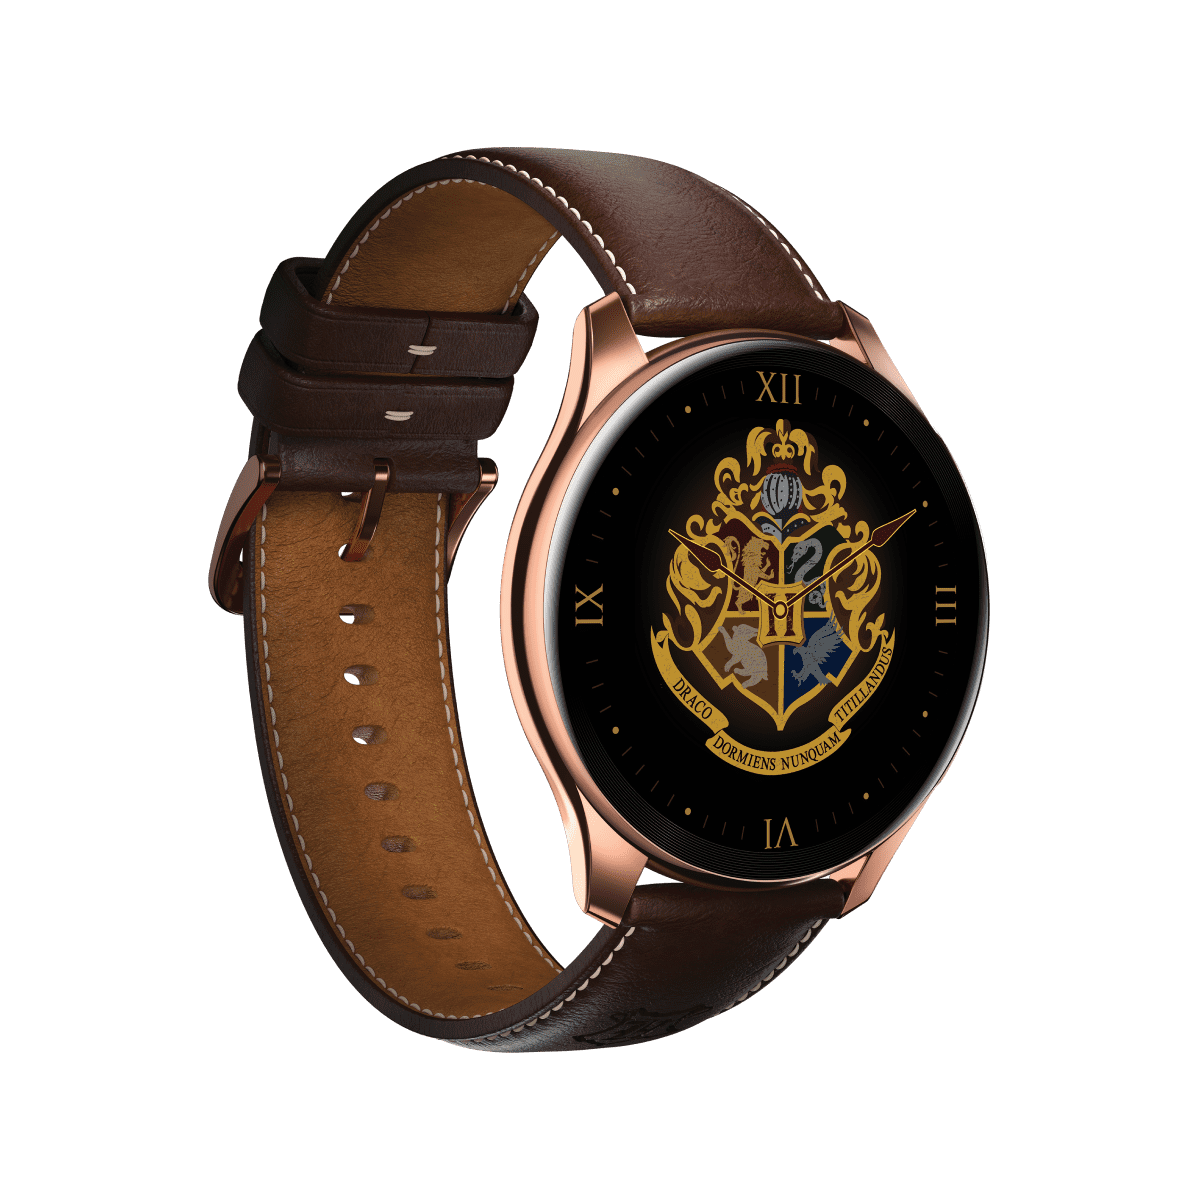 Fossil Just Launched a Limited Edition Harry Potter Collection – StyleCaster